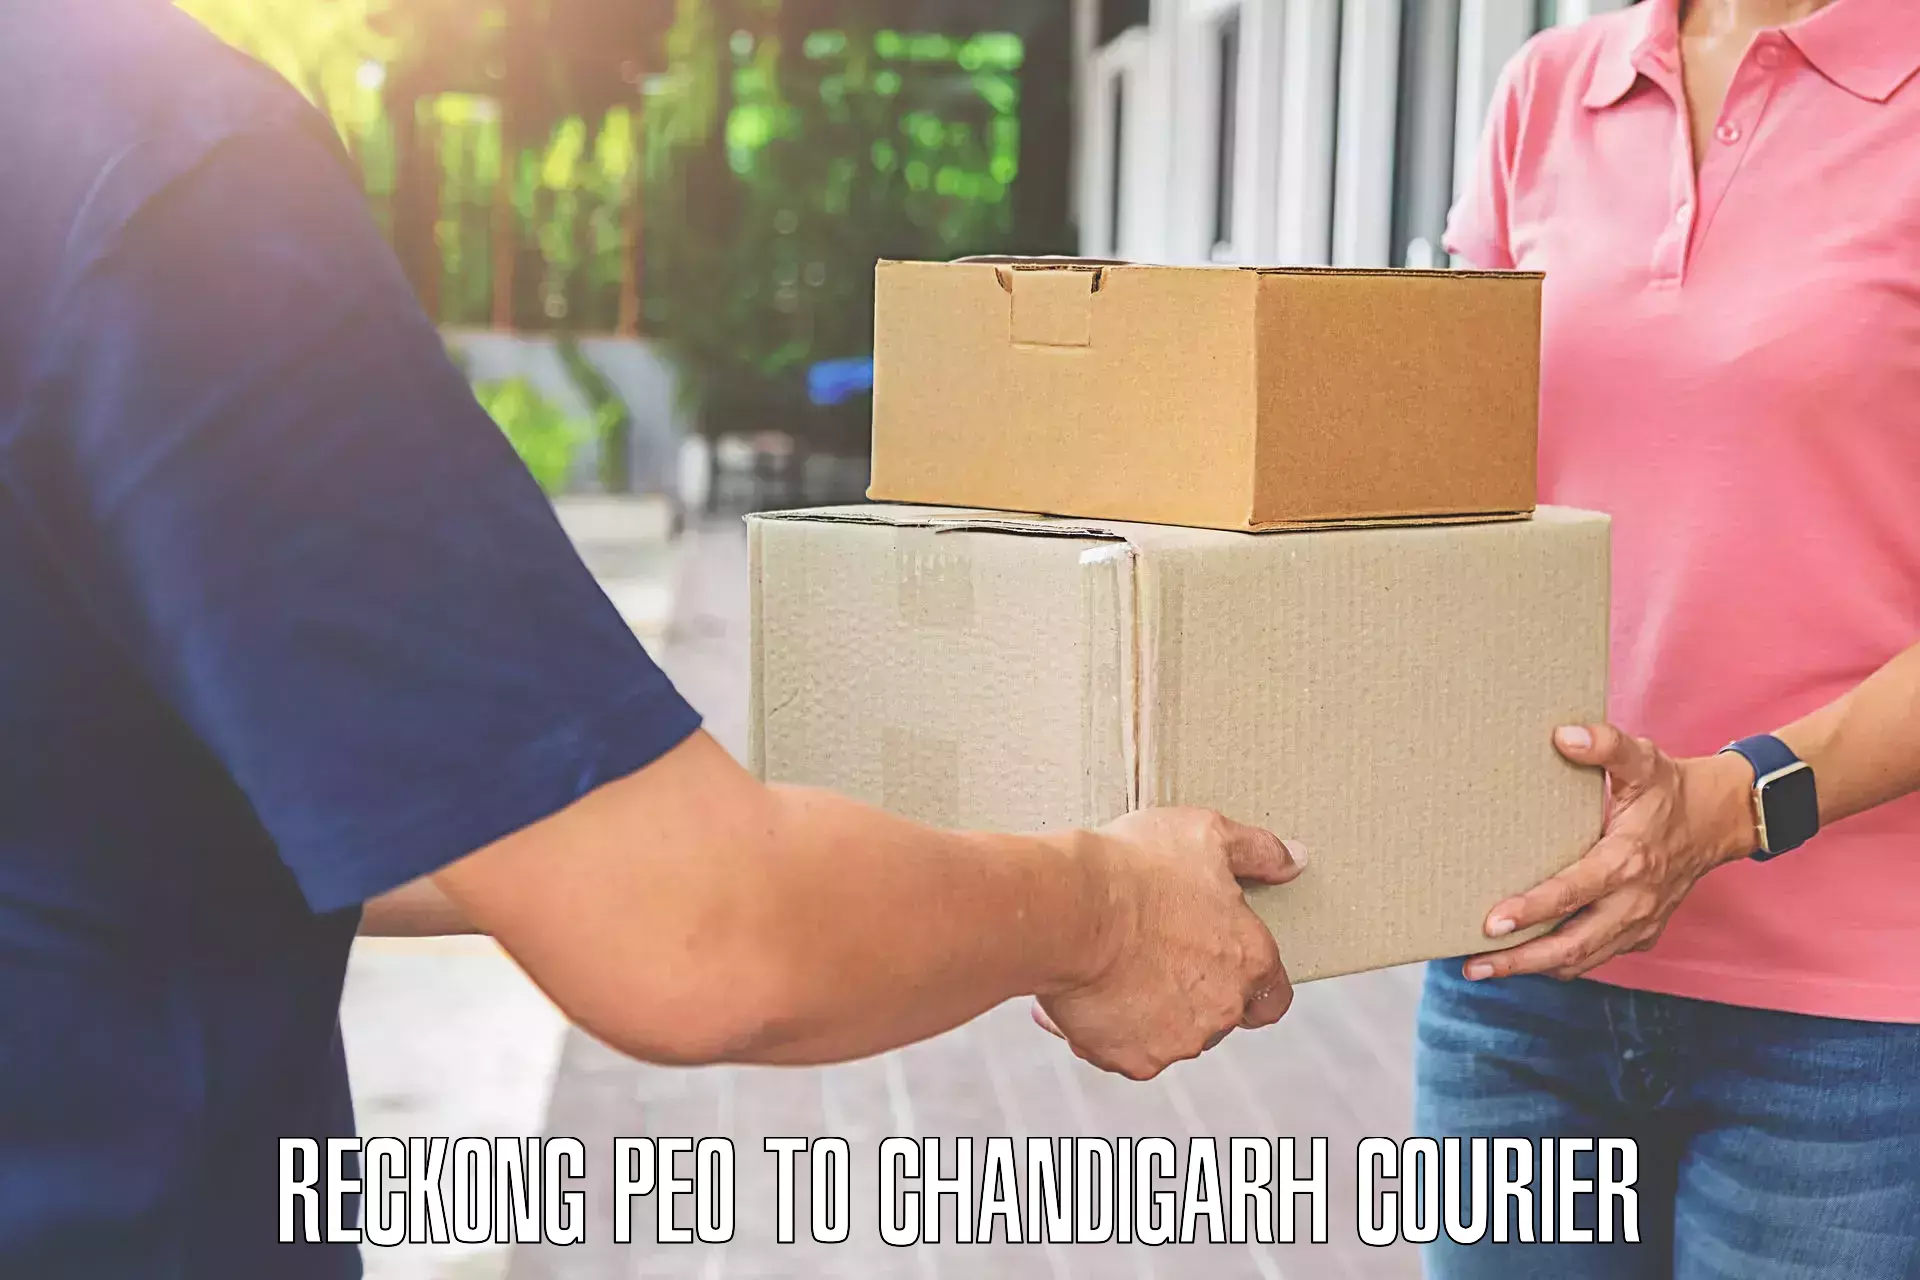 Quick luggage shipment in Reckong Peo to Chandigarh